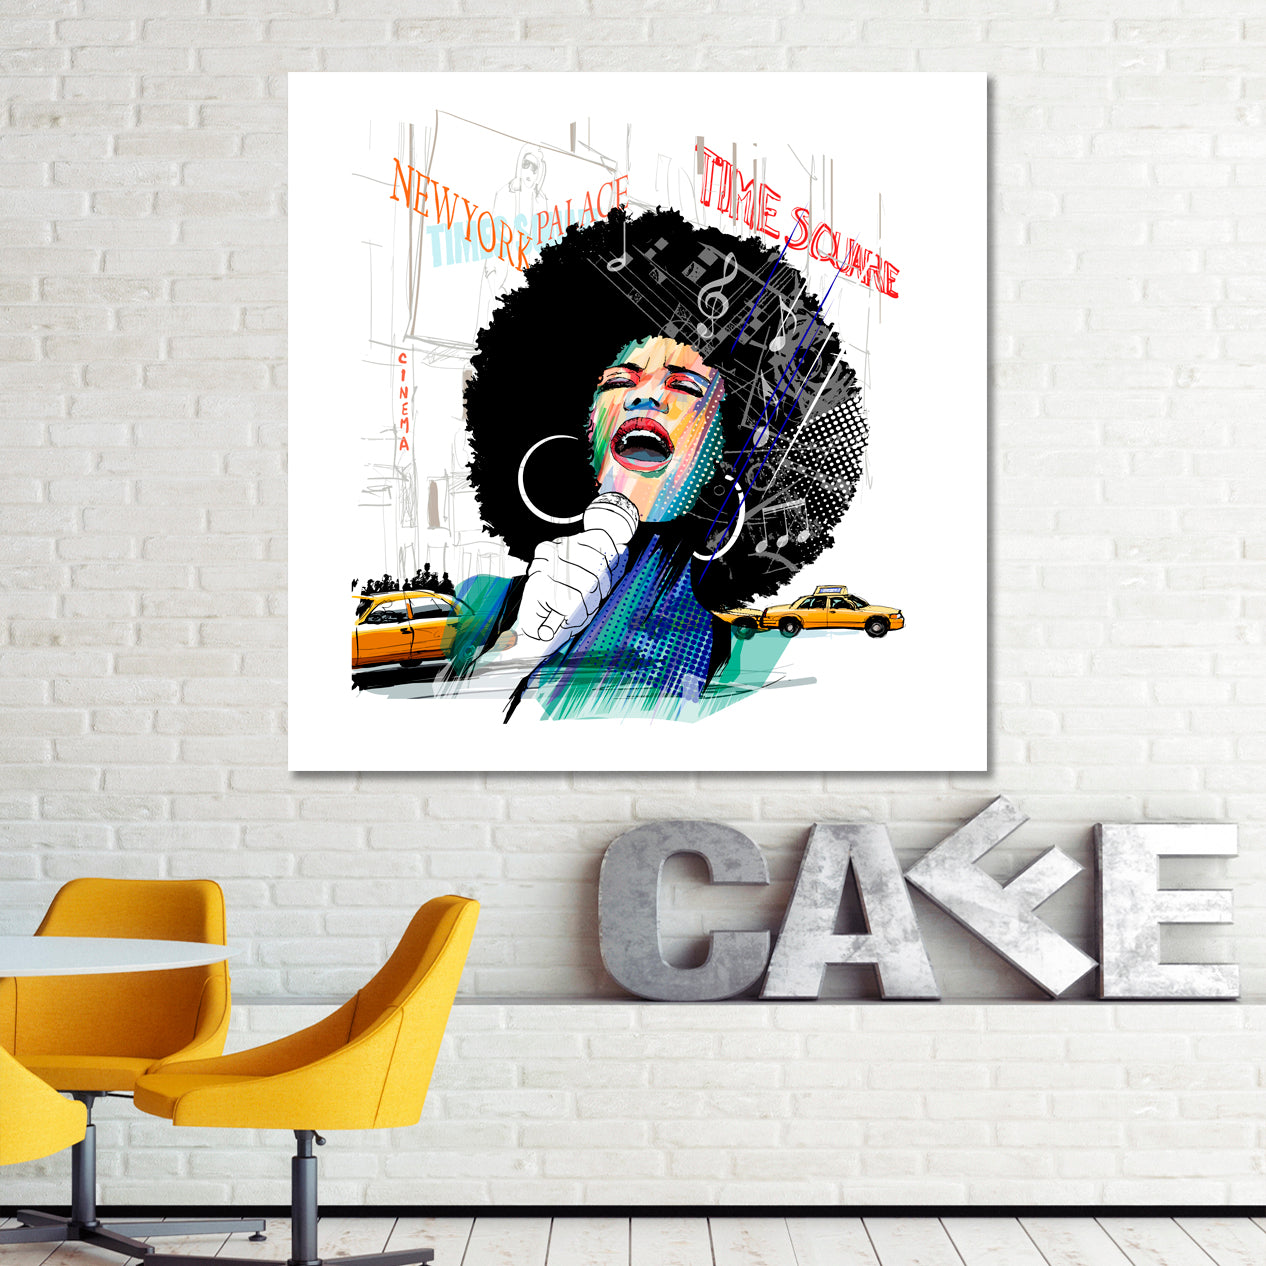 African American Jazz Singer New York Time Square People Portrait Wall Hangings Artesty   